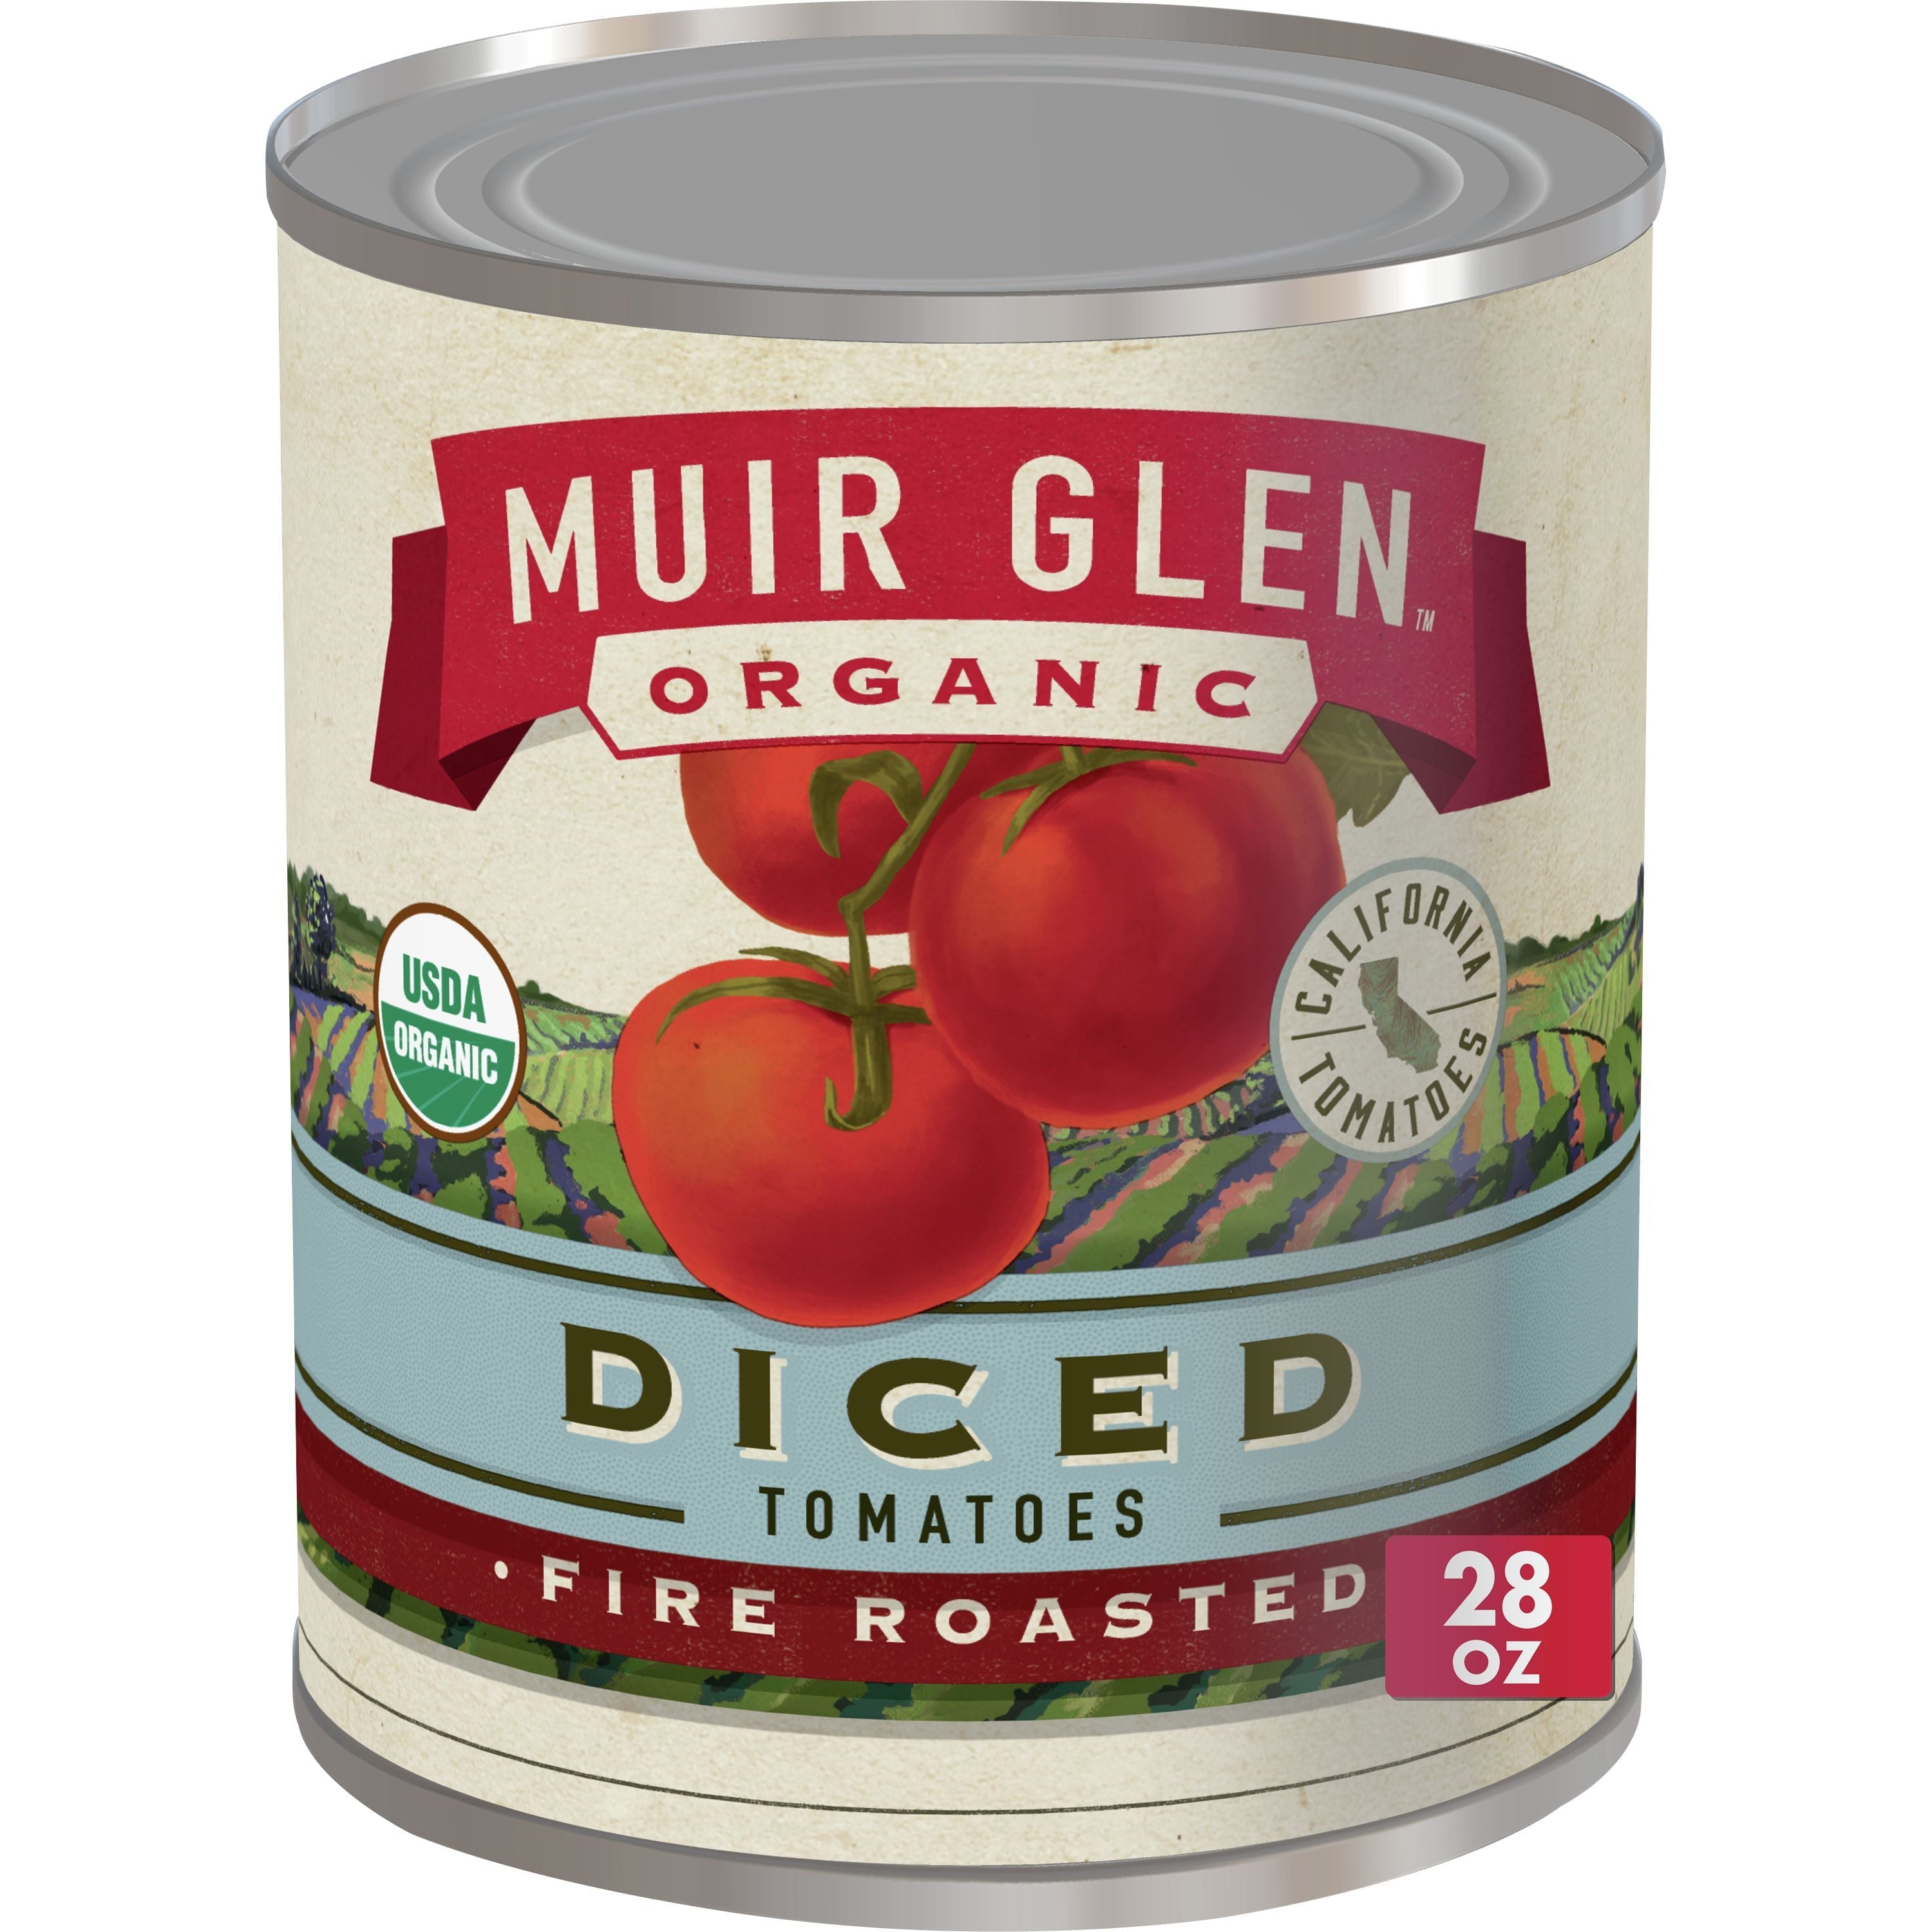 Muir Glen Tomatoes Organic Diced Fire Rosted 28 Oz